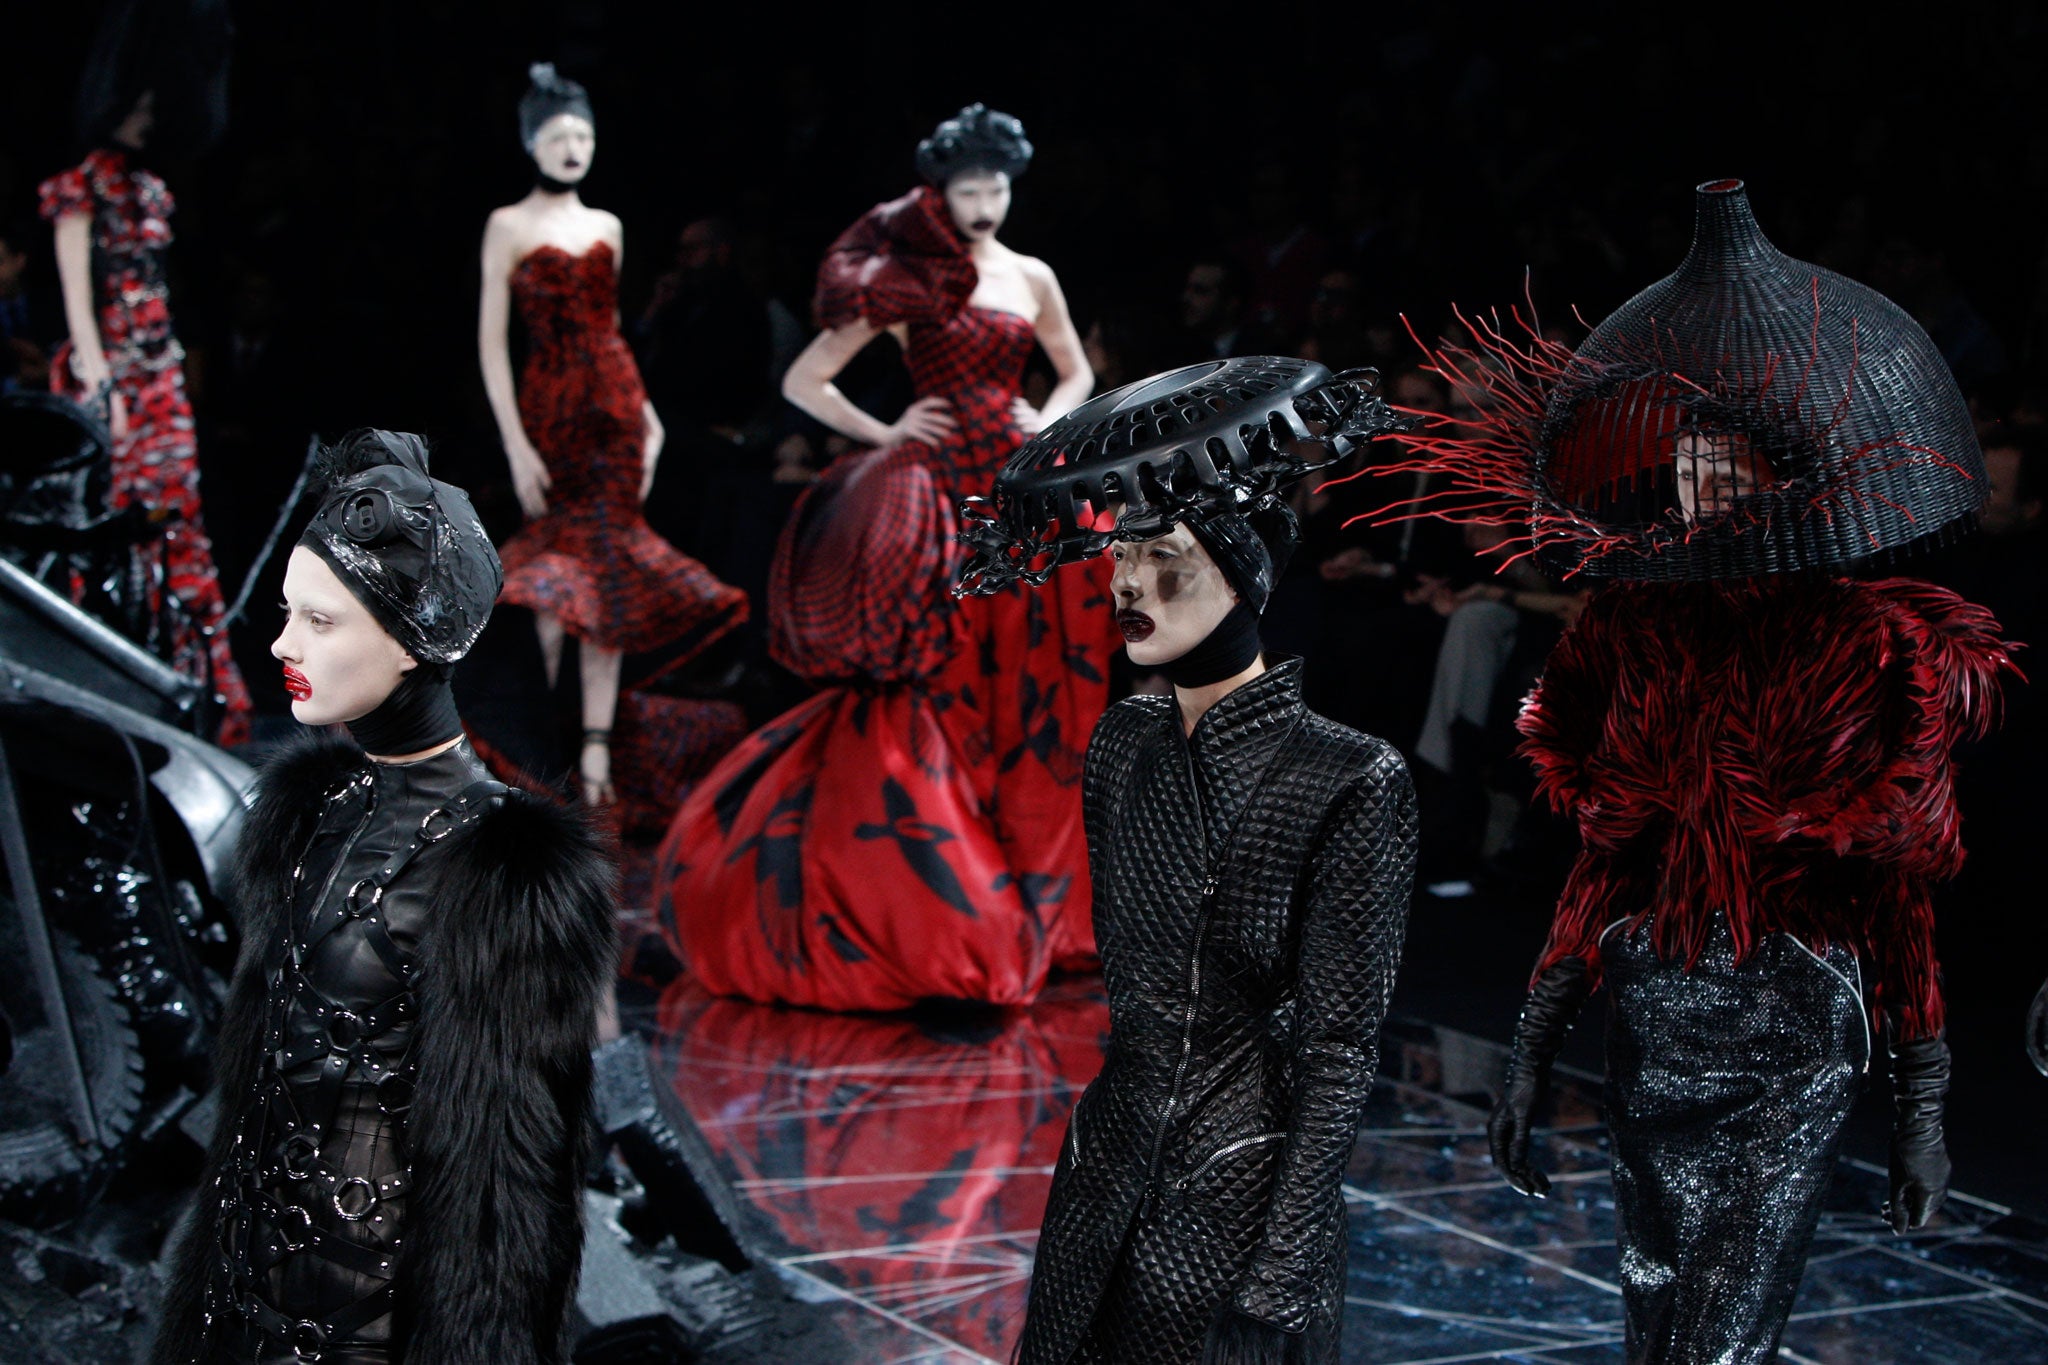 Alexander McQueen: The catwalk was a stage for the designer's astonishing  and troubling vision, The Independent